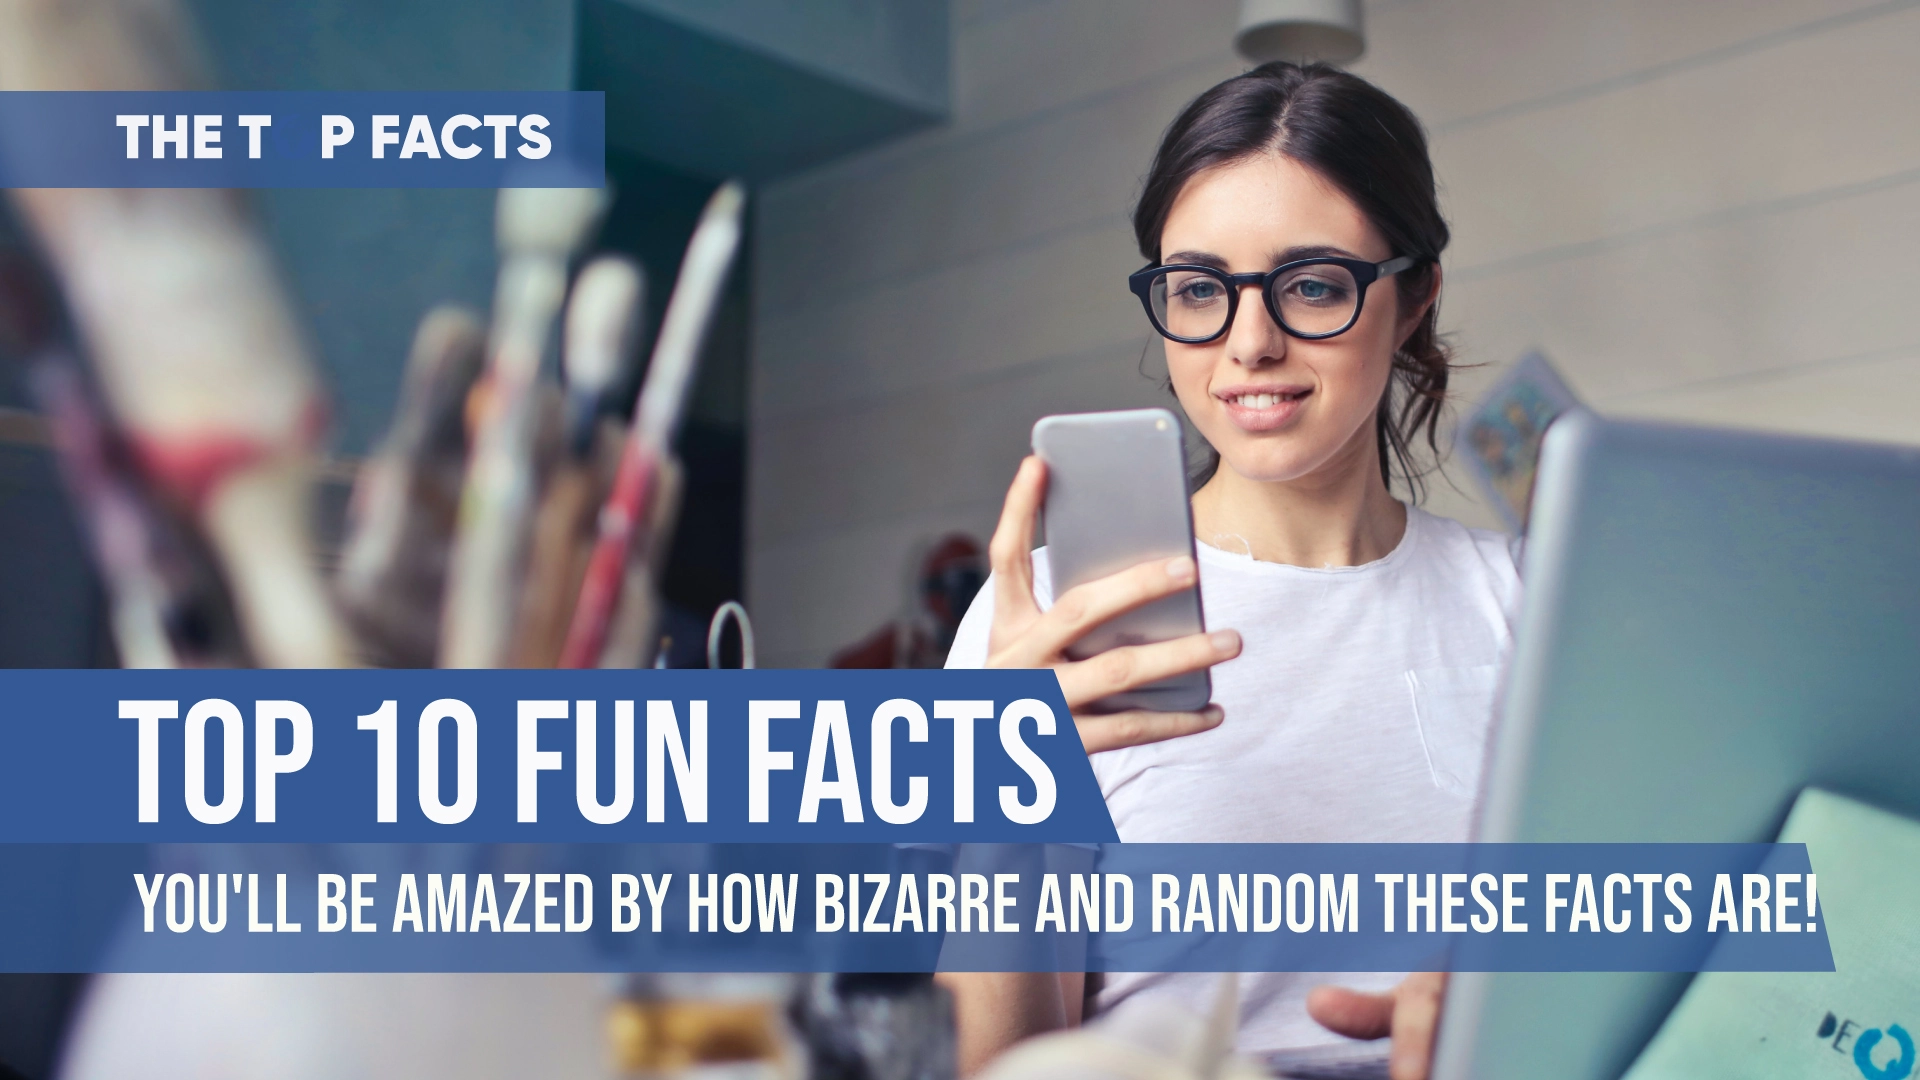 Top 10 fun facts that will amazed you